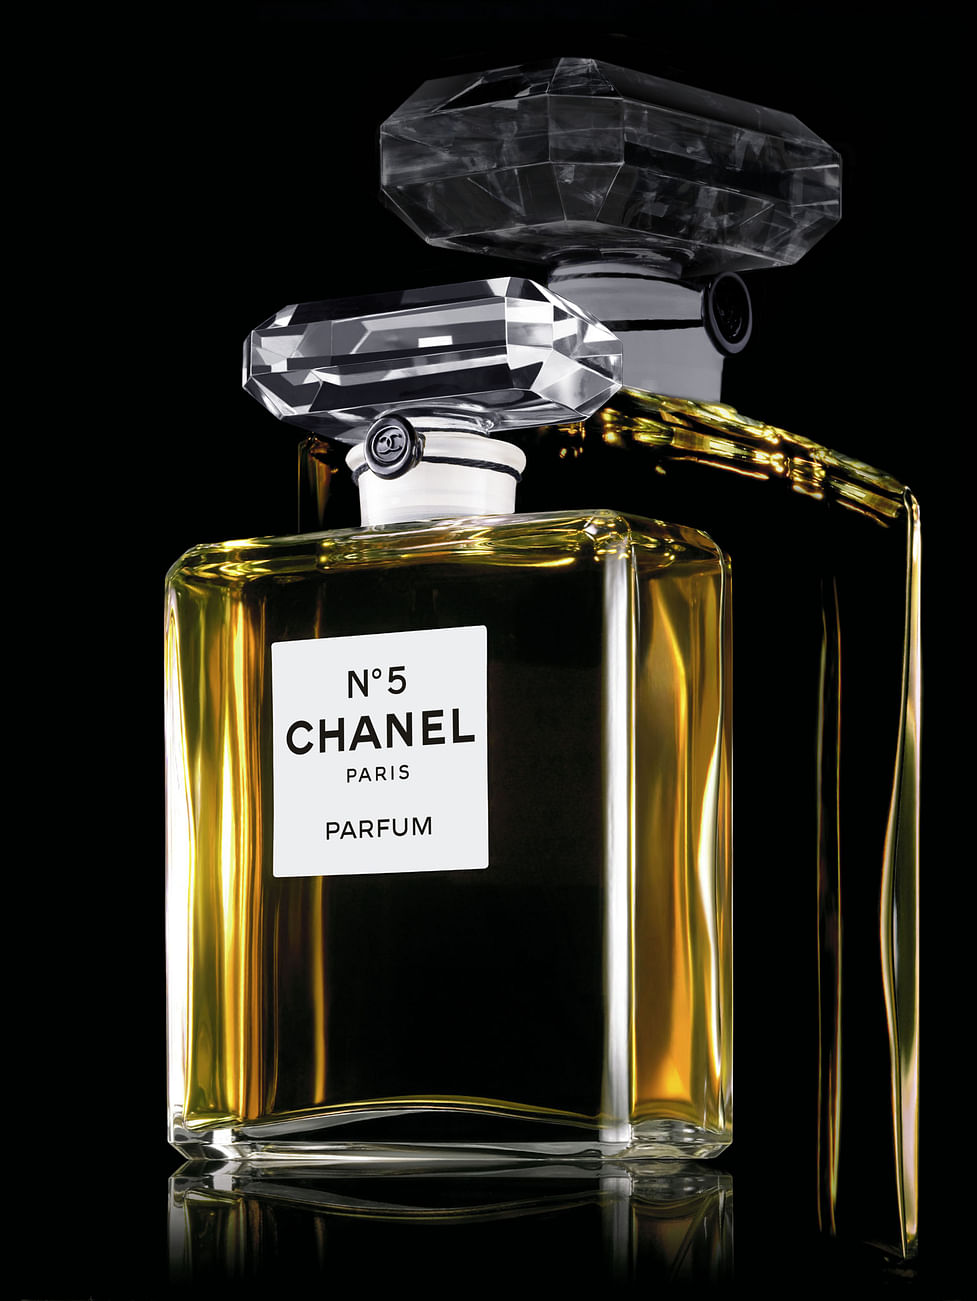 Marion Cotillard on Becoming the New Face of the Iconic Chanel No.5